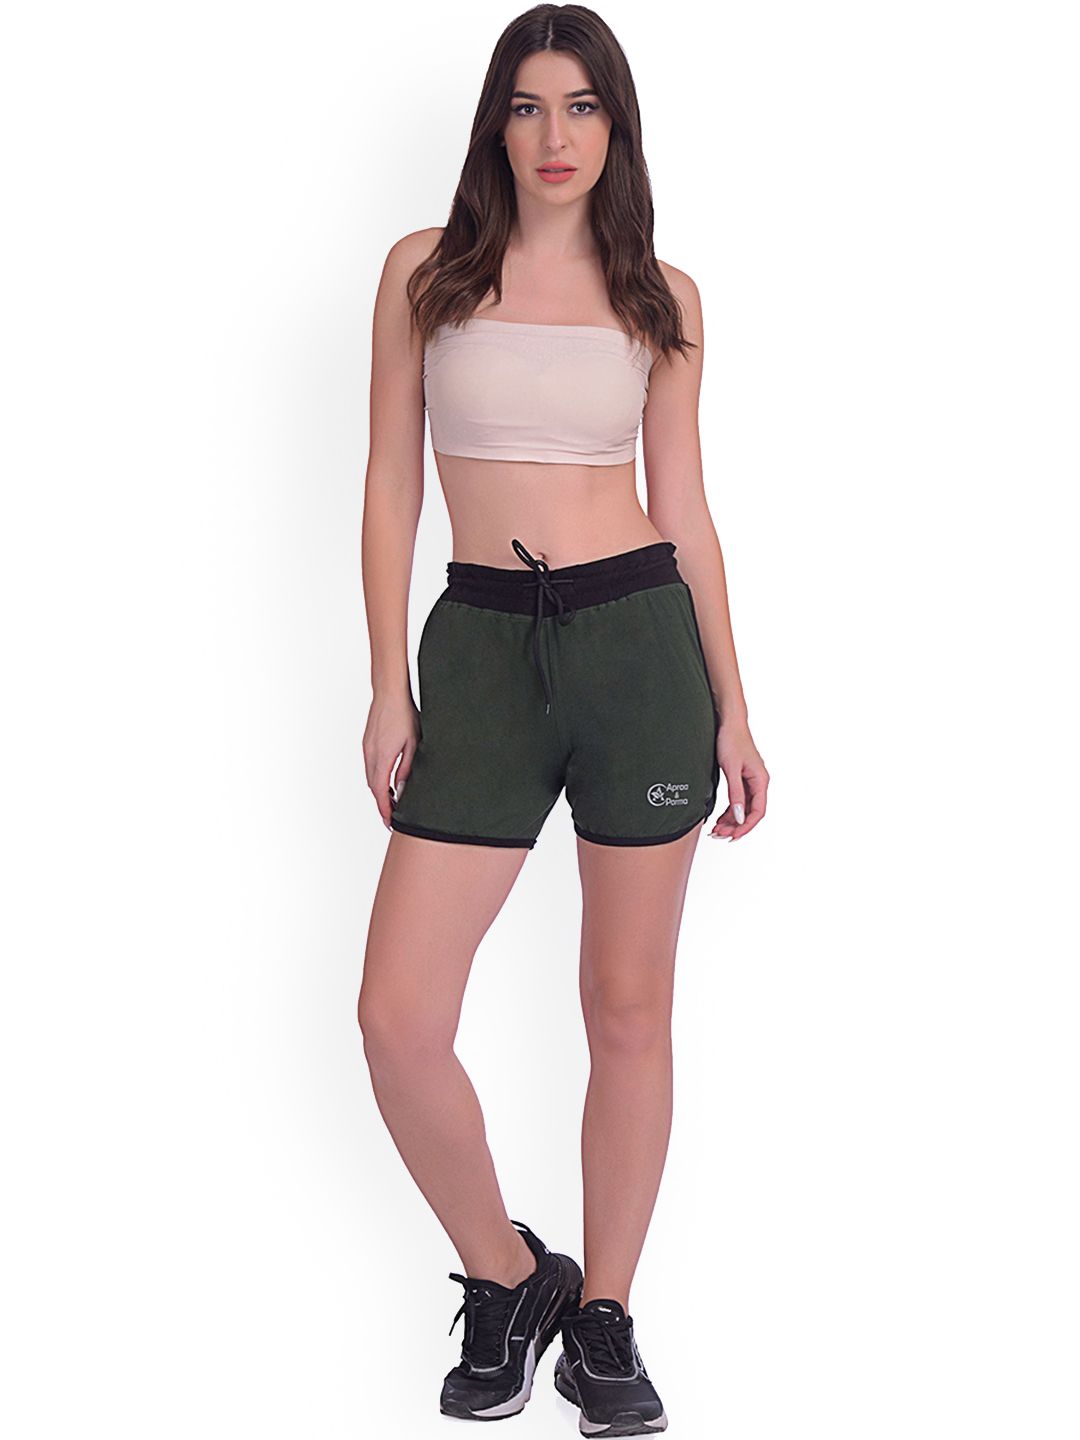 Apraa & Parma Women Green Low-Rise Training or Gym Sports Shorts Price in India